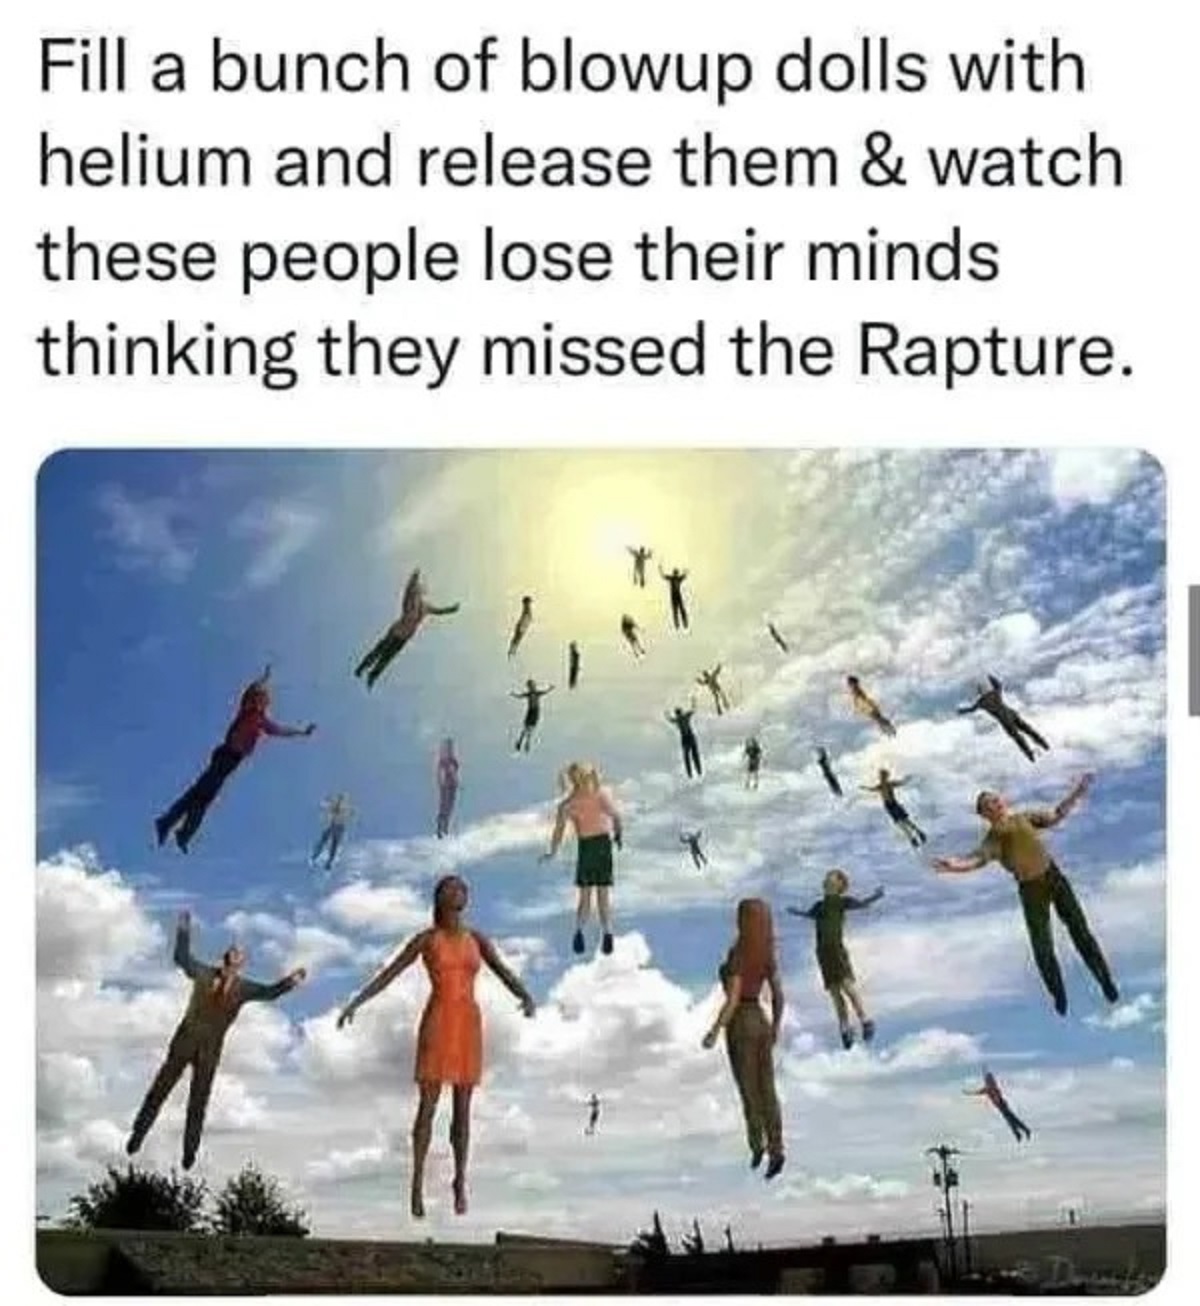 fill a bunch of blow up dolls - Fill a bunch of blowup dolls with helium and release them & watch these people lose their minds thinking they missed the Rapture.